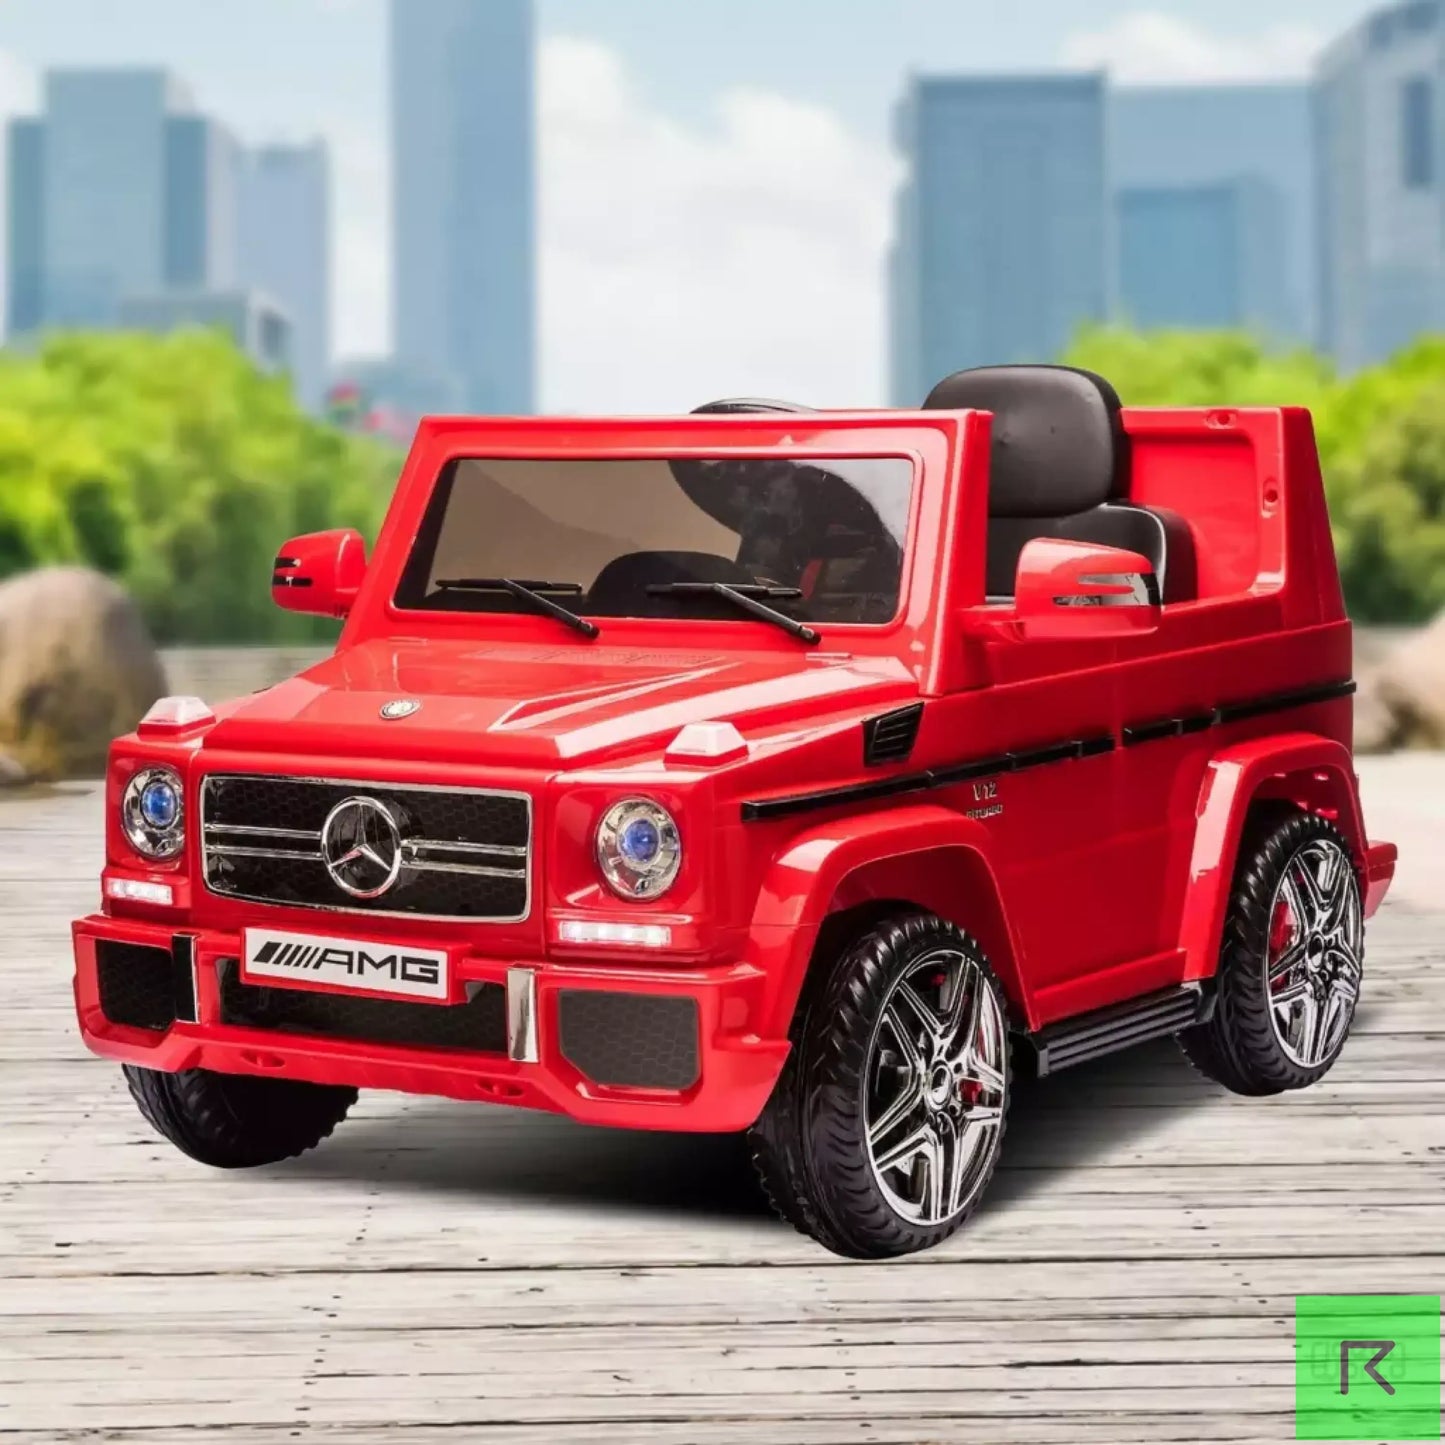 MERCEDES BENZ RED AMG G65 Licensed Kids Ride On Electric Car with RC - Red